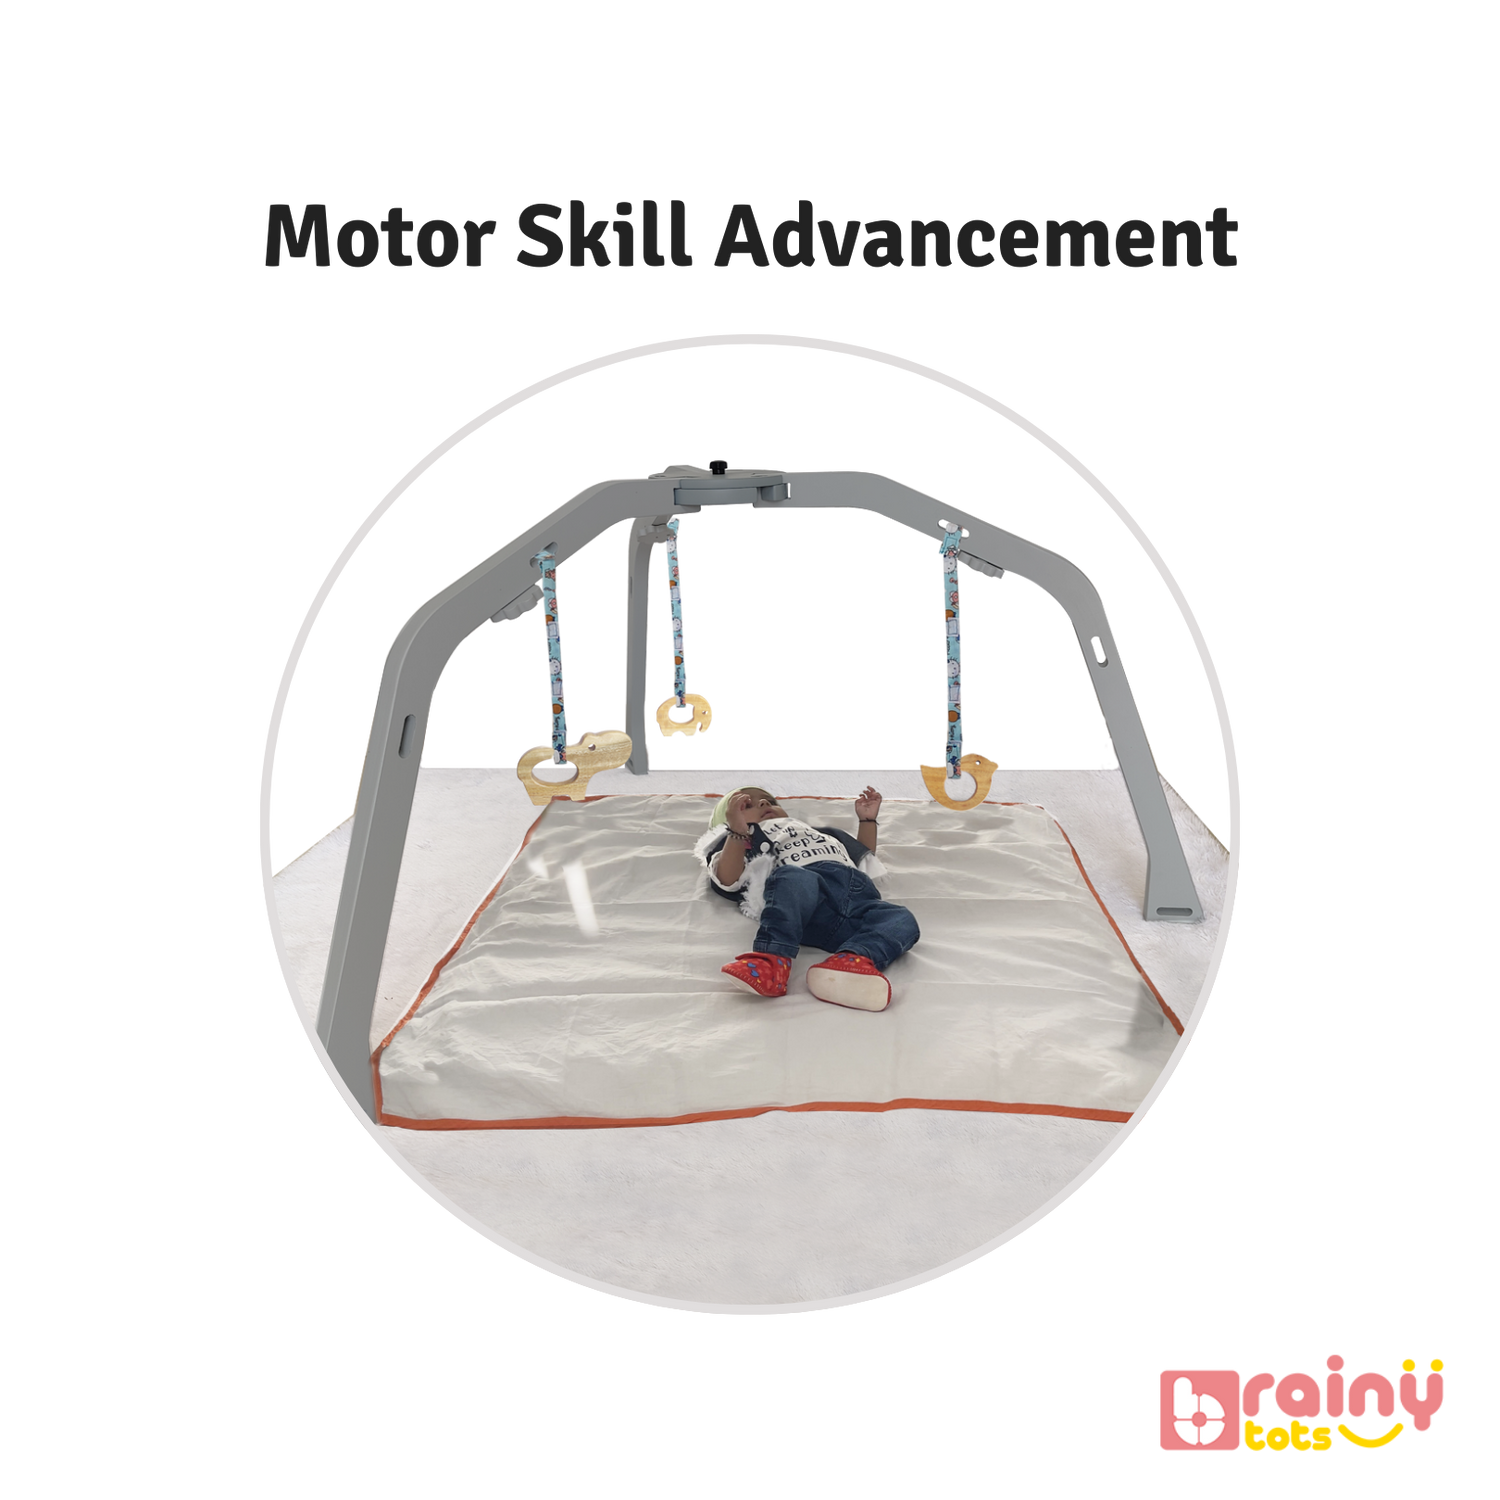 Encourages reaching, grasping, and coordination in infants. This Montessori wooden play gym, ideal for babies aged 0-12 months, enhances sensory development with varied textures and interactive elements. Safe, sturdy, and engaging for early learning and exploration.